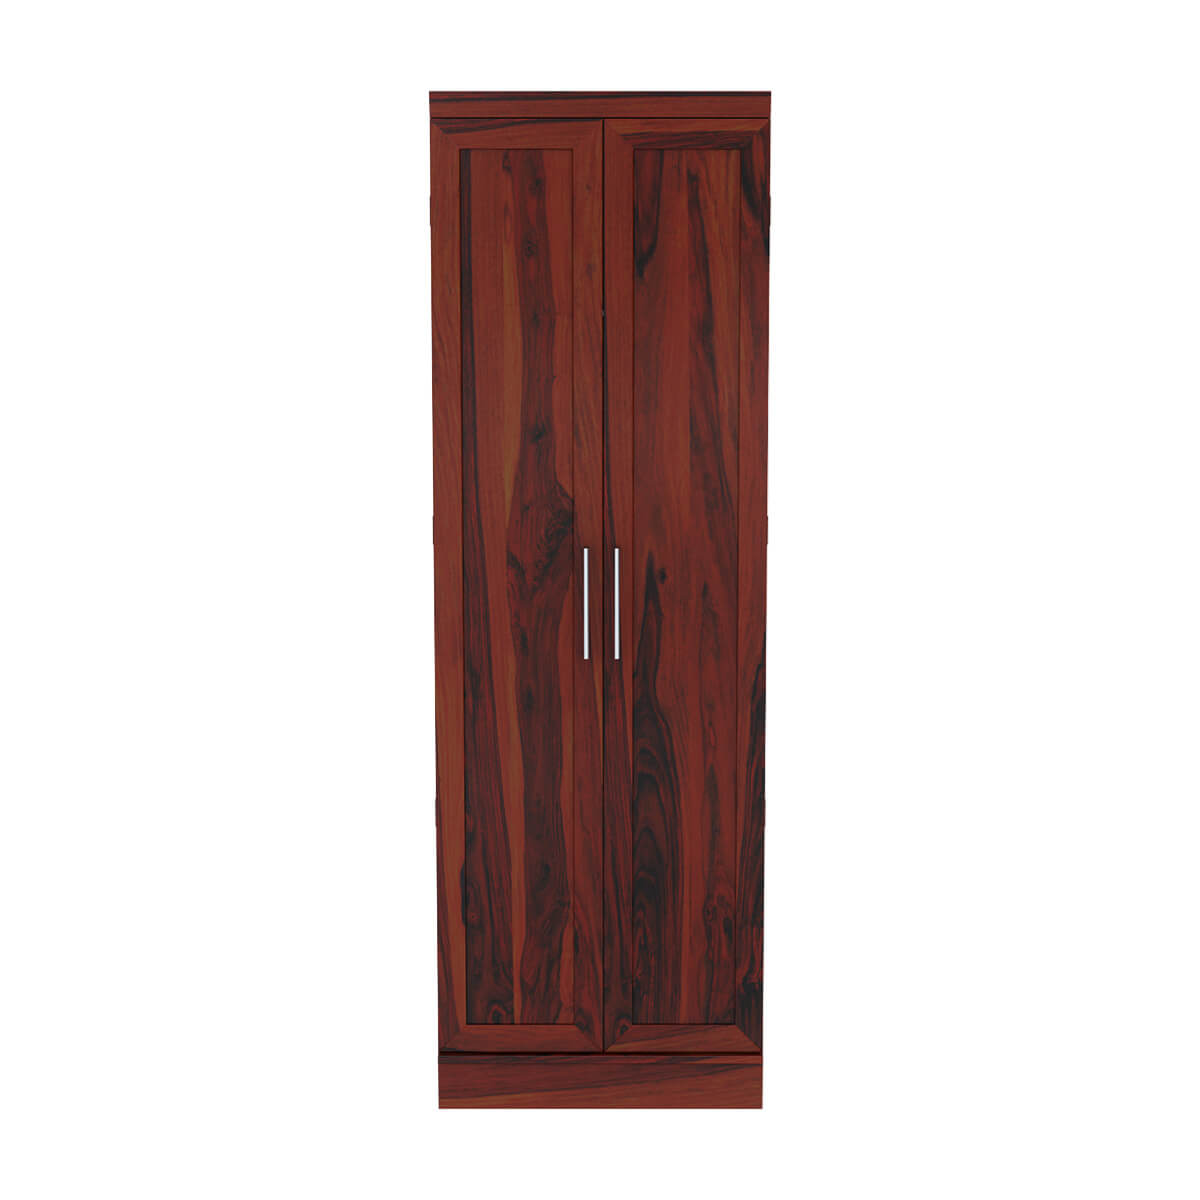 Morna Solid Teak Wood Clothing Armoire Wardrobe with Removal Shelves.